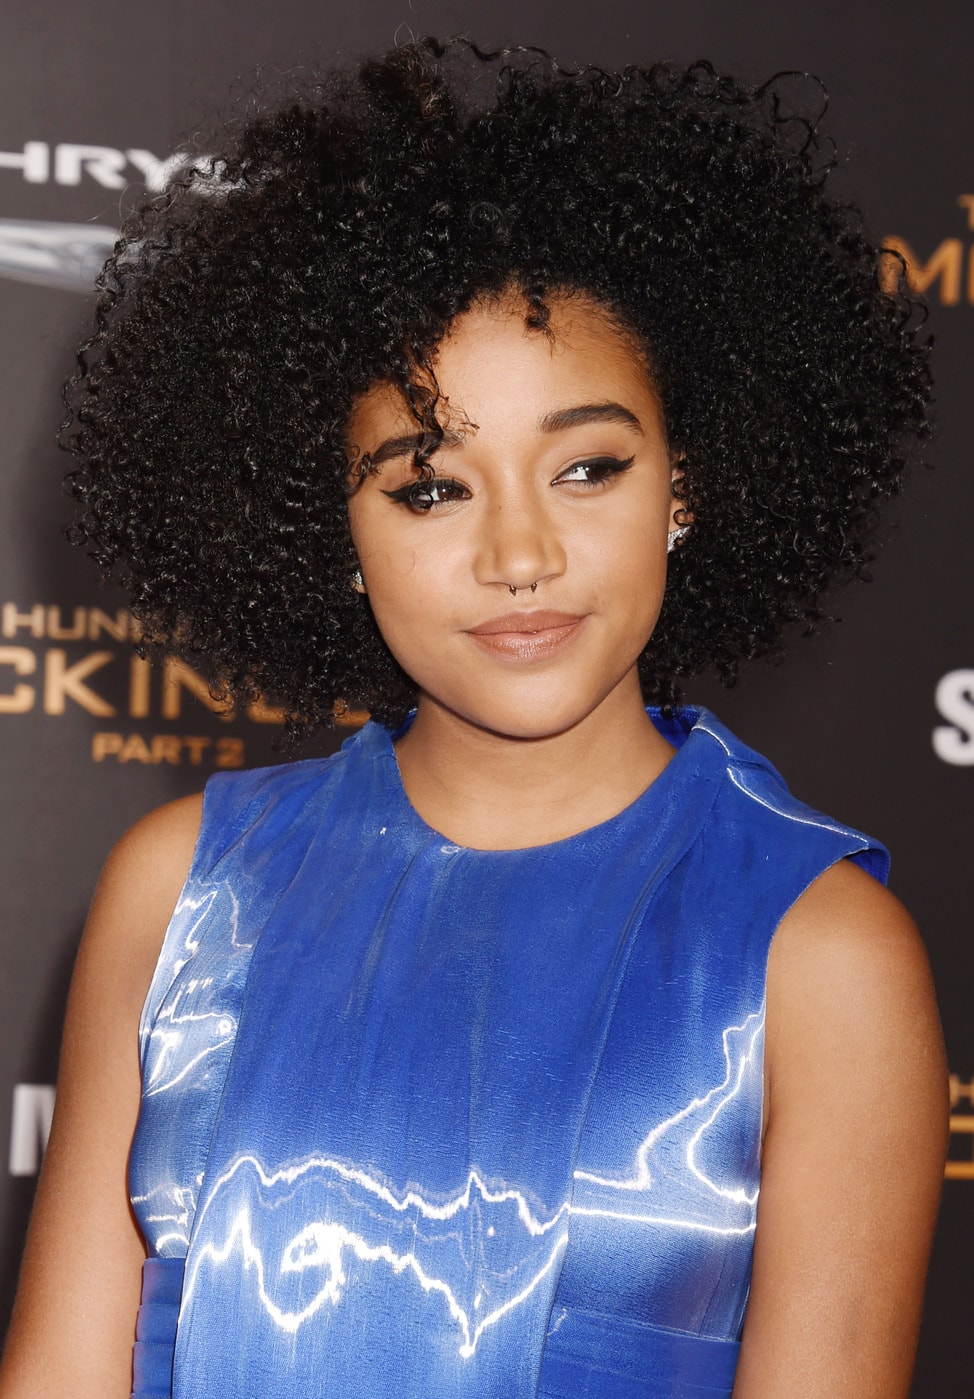 Amandla Stenberg at the premiere of The Hunger Games Mockingjay Part 2 in a blue dress